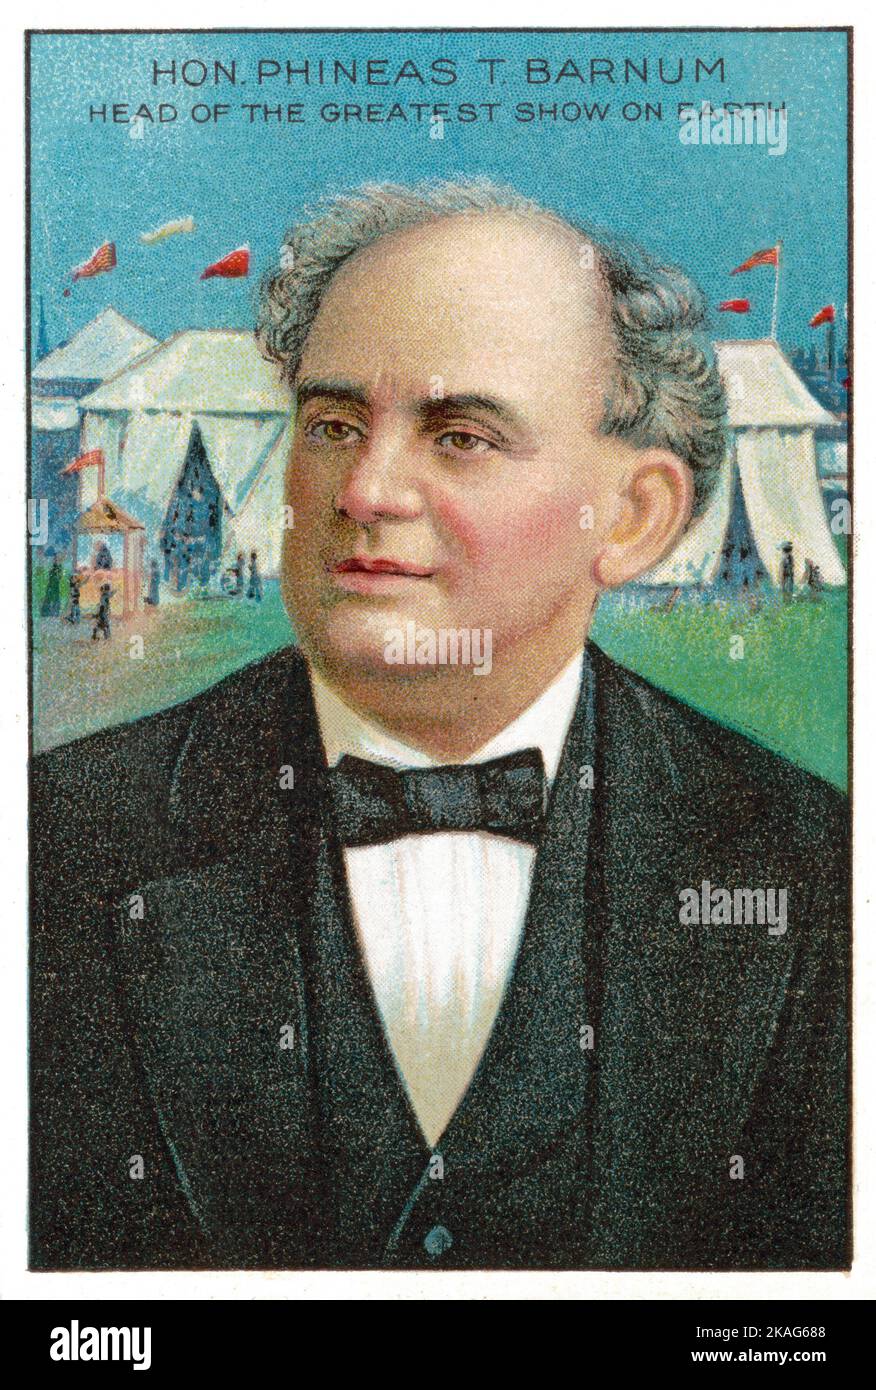 Honourable Phineas T. Barnum - Men of History - Zigarettenkarte für Miners der American Tobacco Company Extra Smoking Tobacco und Royal Bengals Little Cigars 1911 Stockfoto